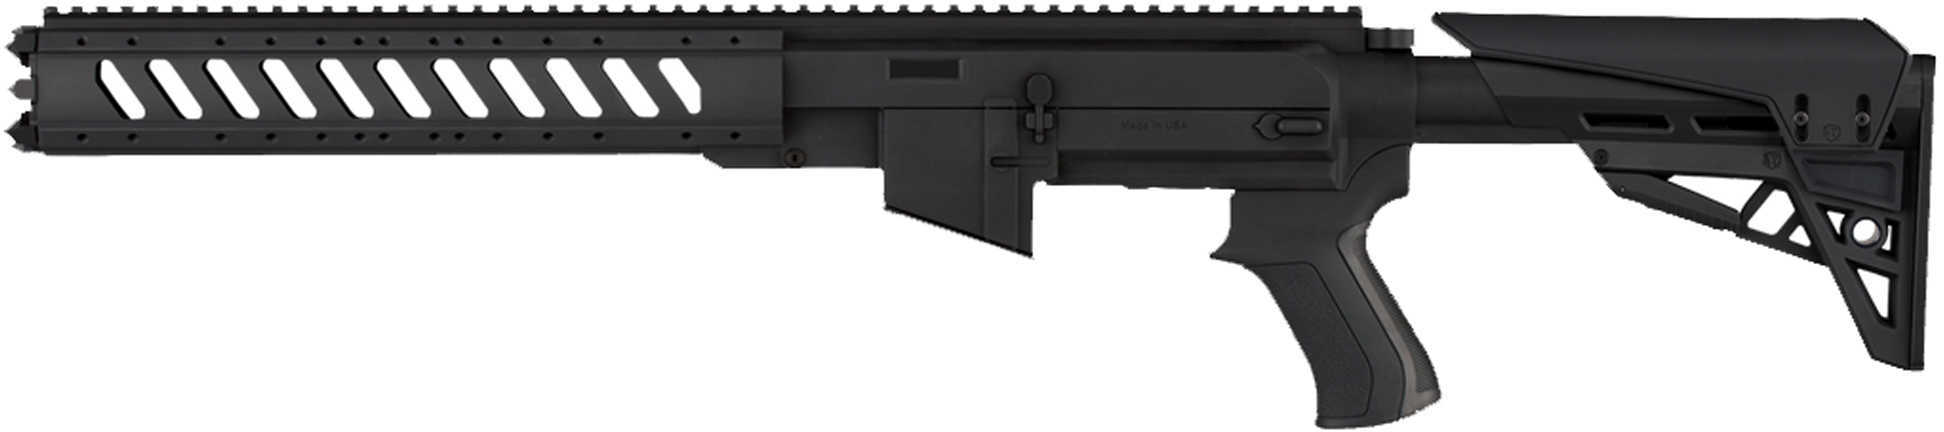 ATI Ruger® 10/22® AR-22 TactLite Stock System W/ 6-Sided Forend